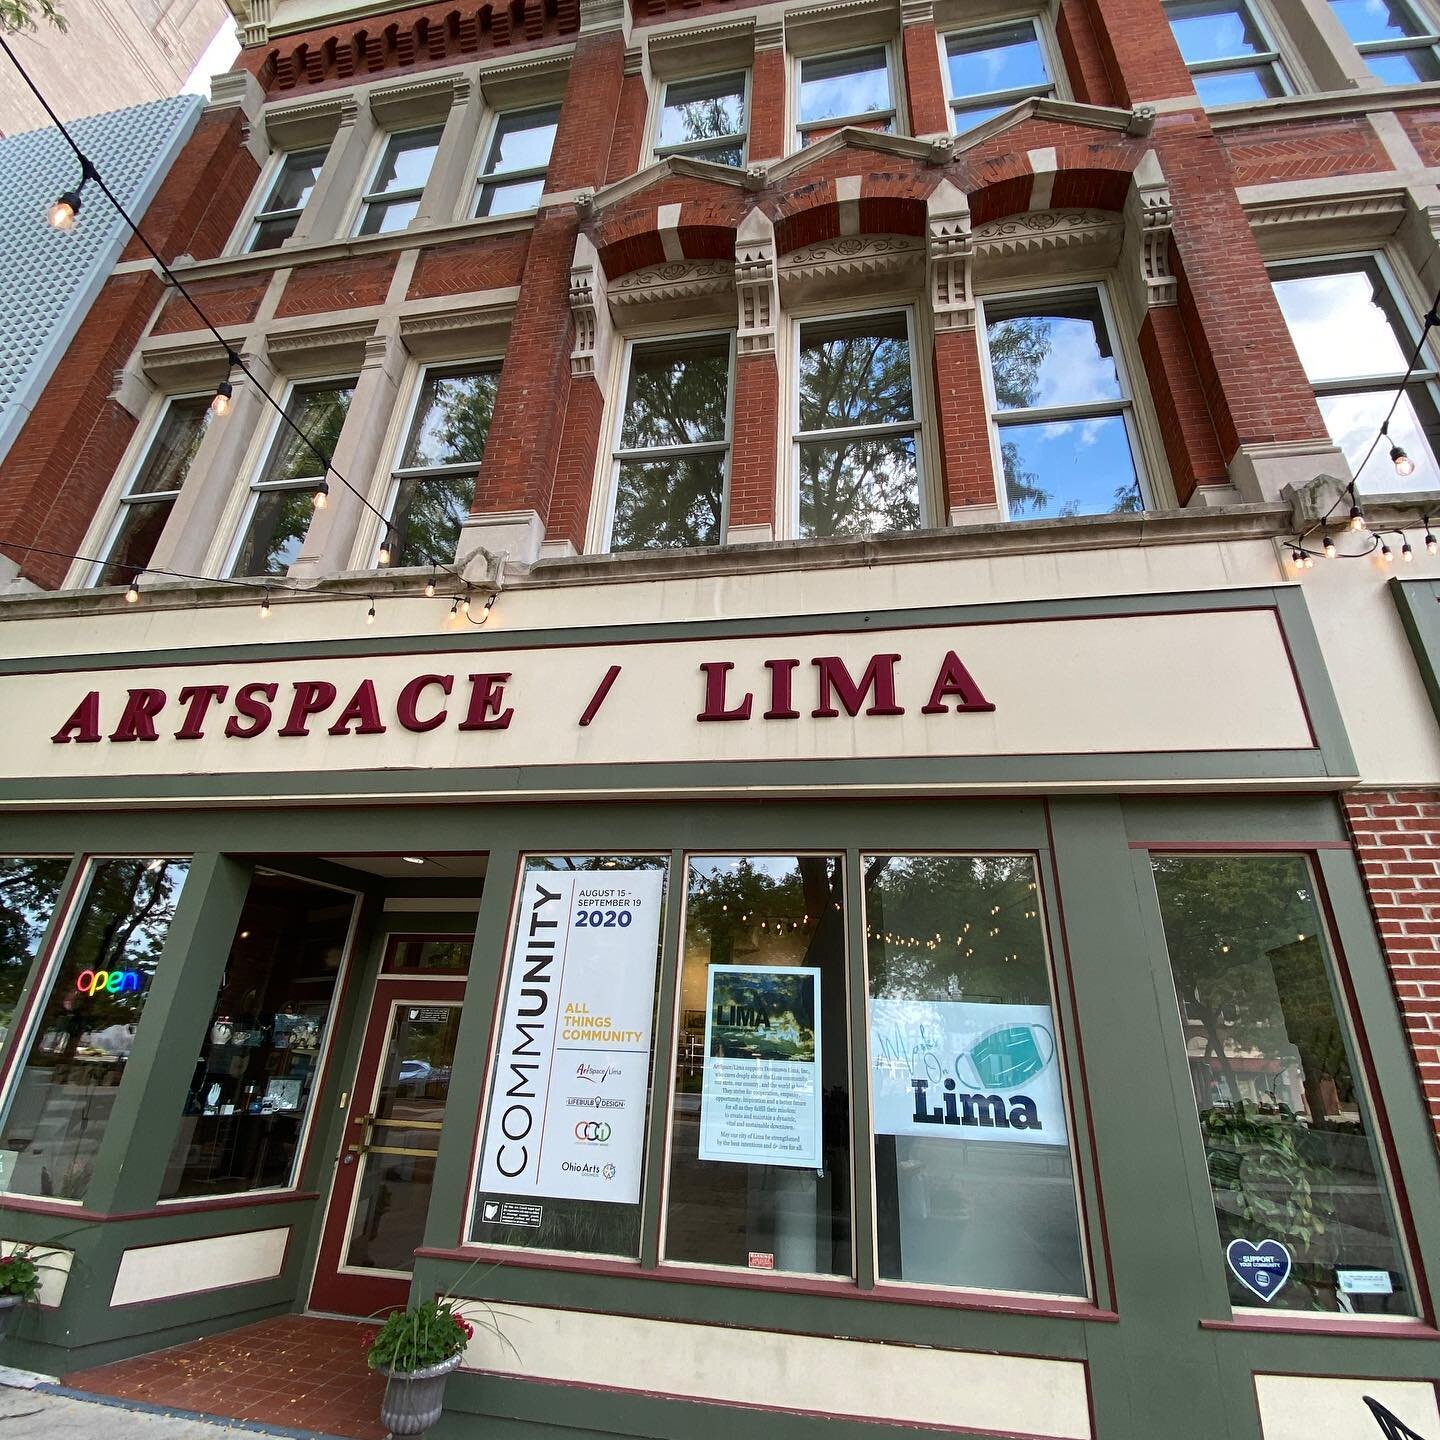 Come check out &ldquo;Where Art and Therapy Unite&rdquo; at @artspace.lima and see the talent of @e_tjordan. August 15 -19